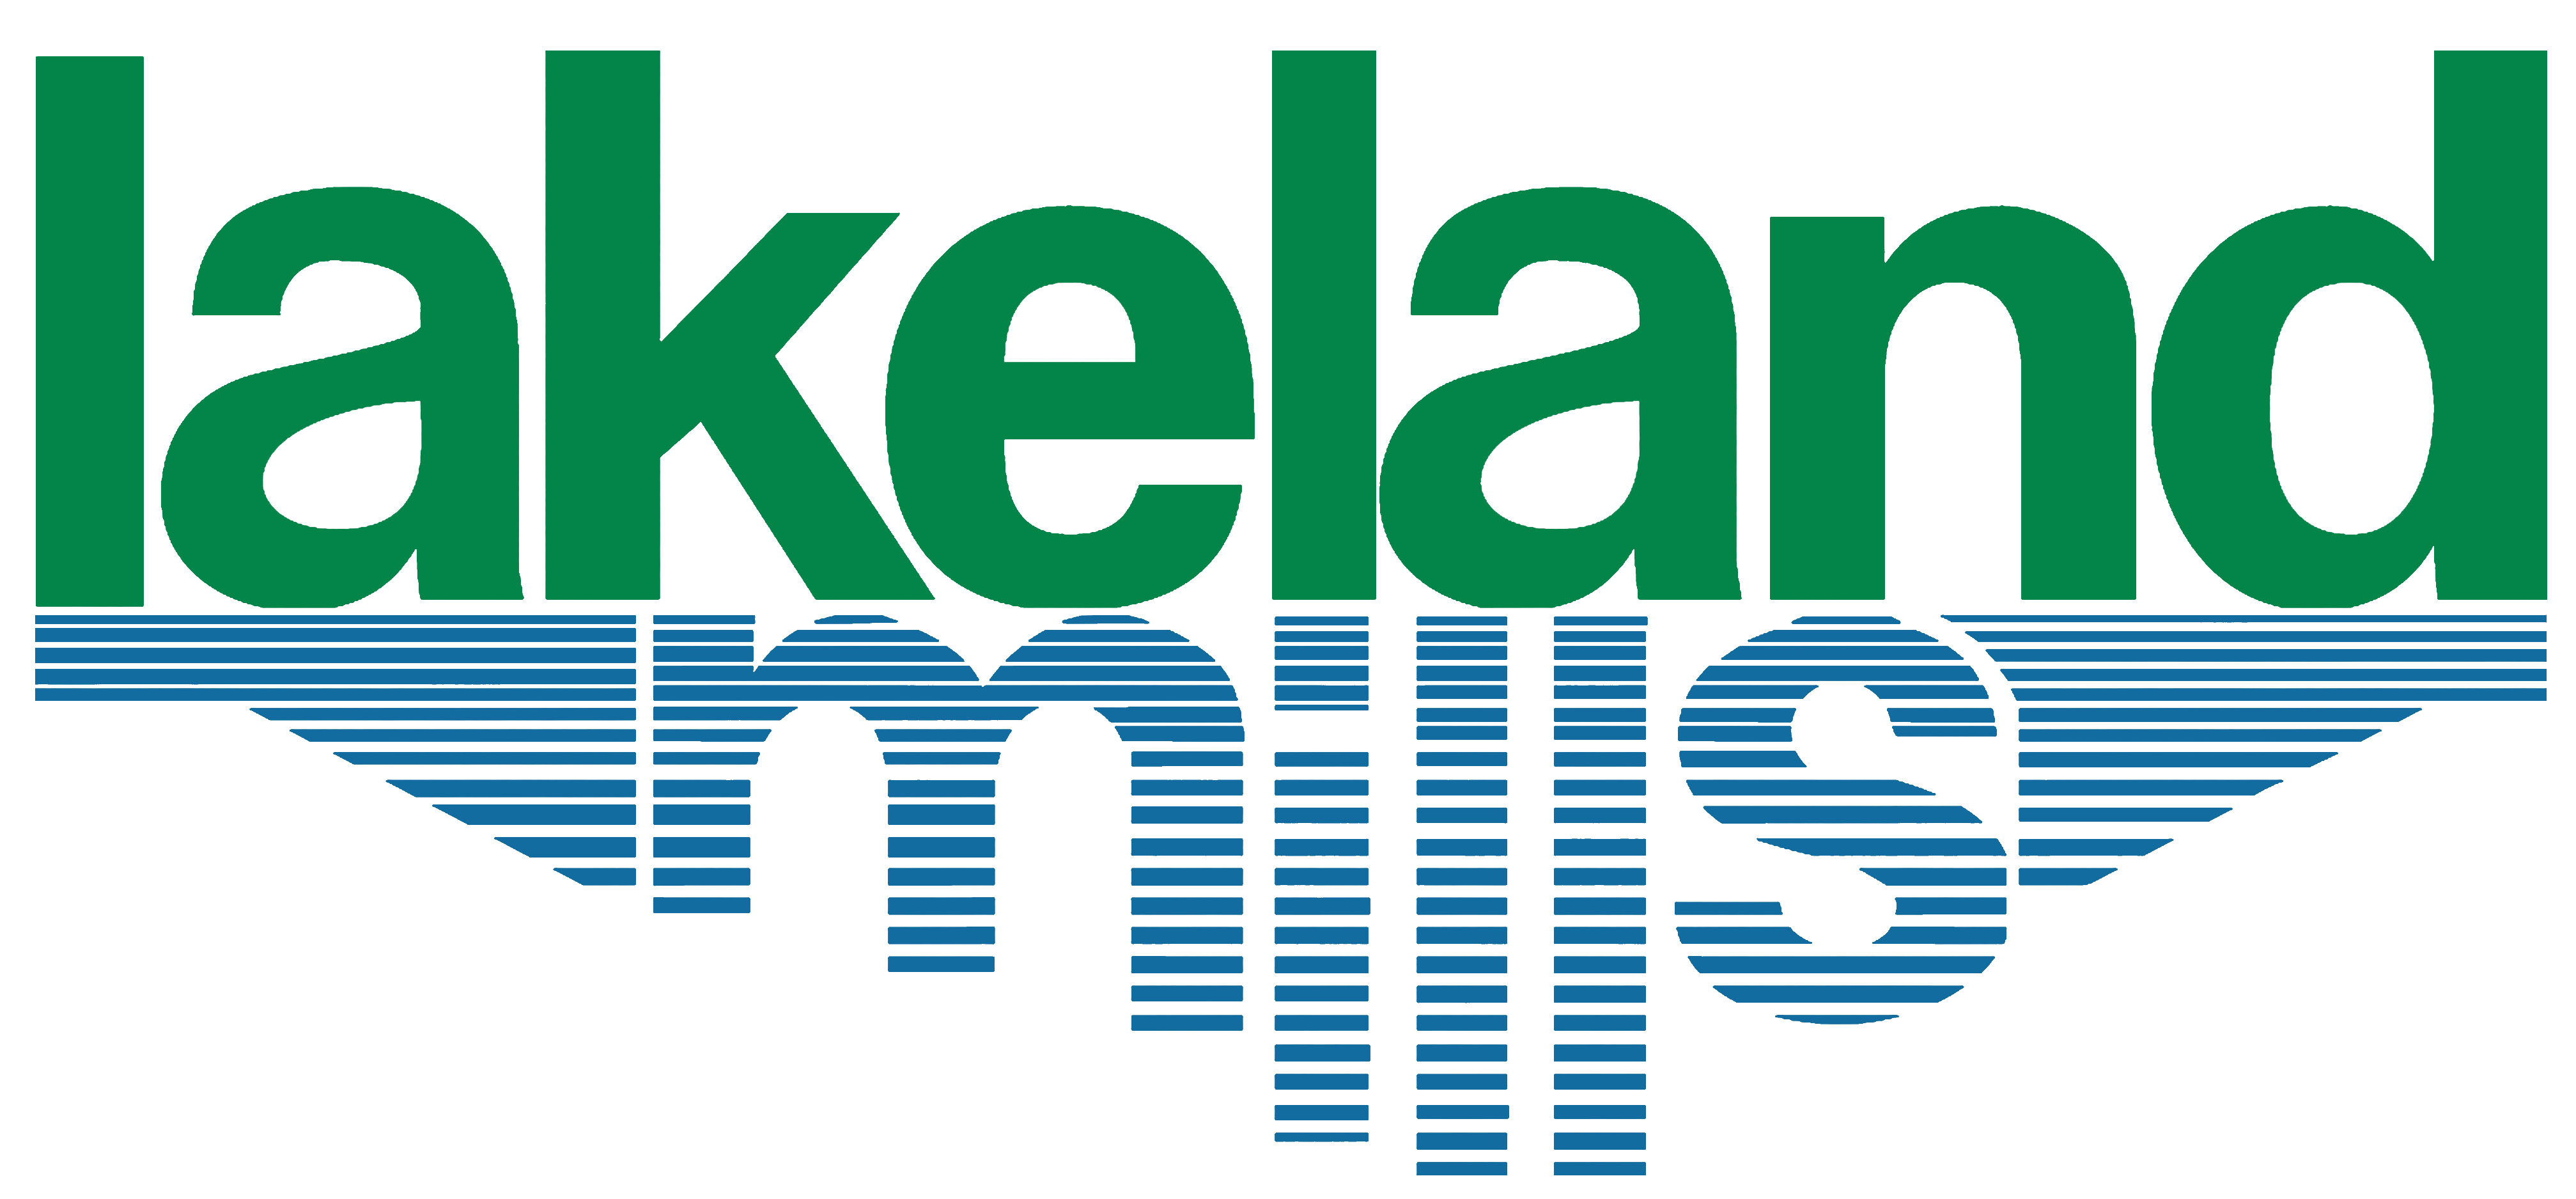 Lakeland Mills logo in a green and blue color.